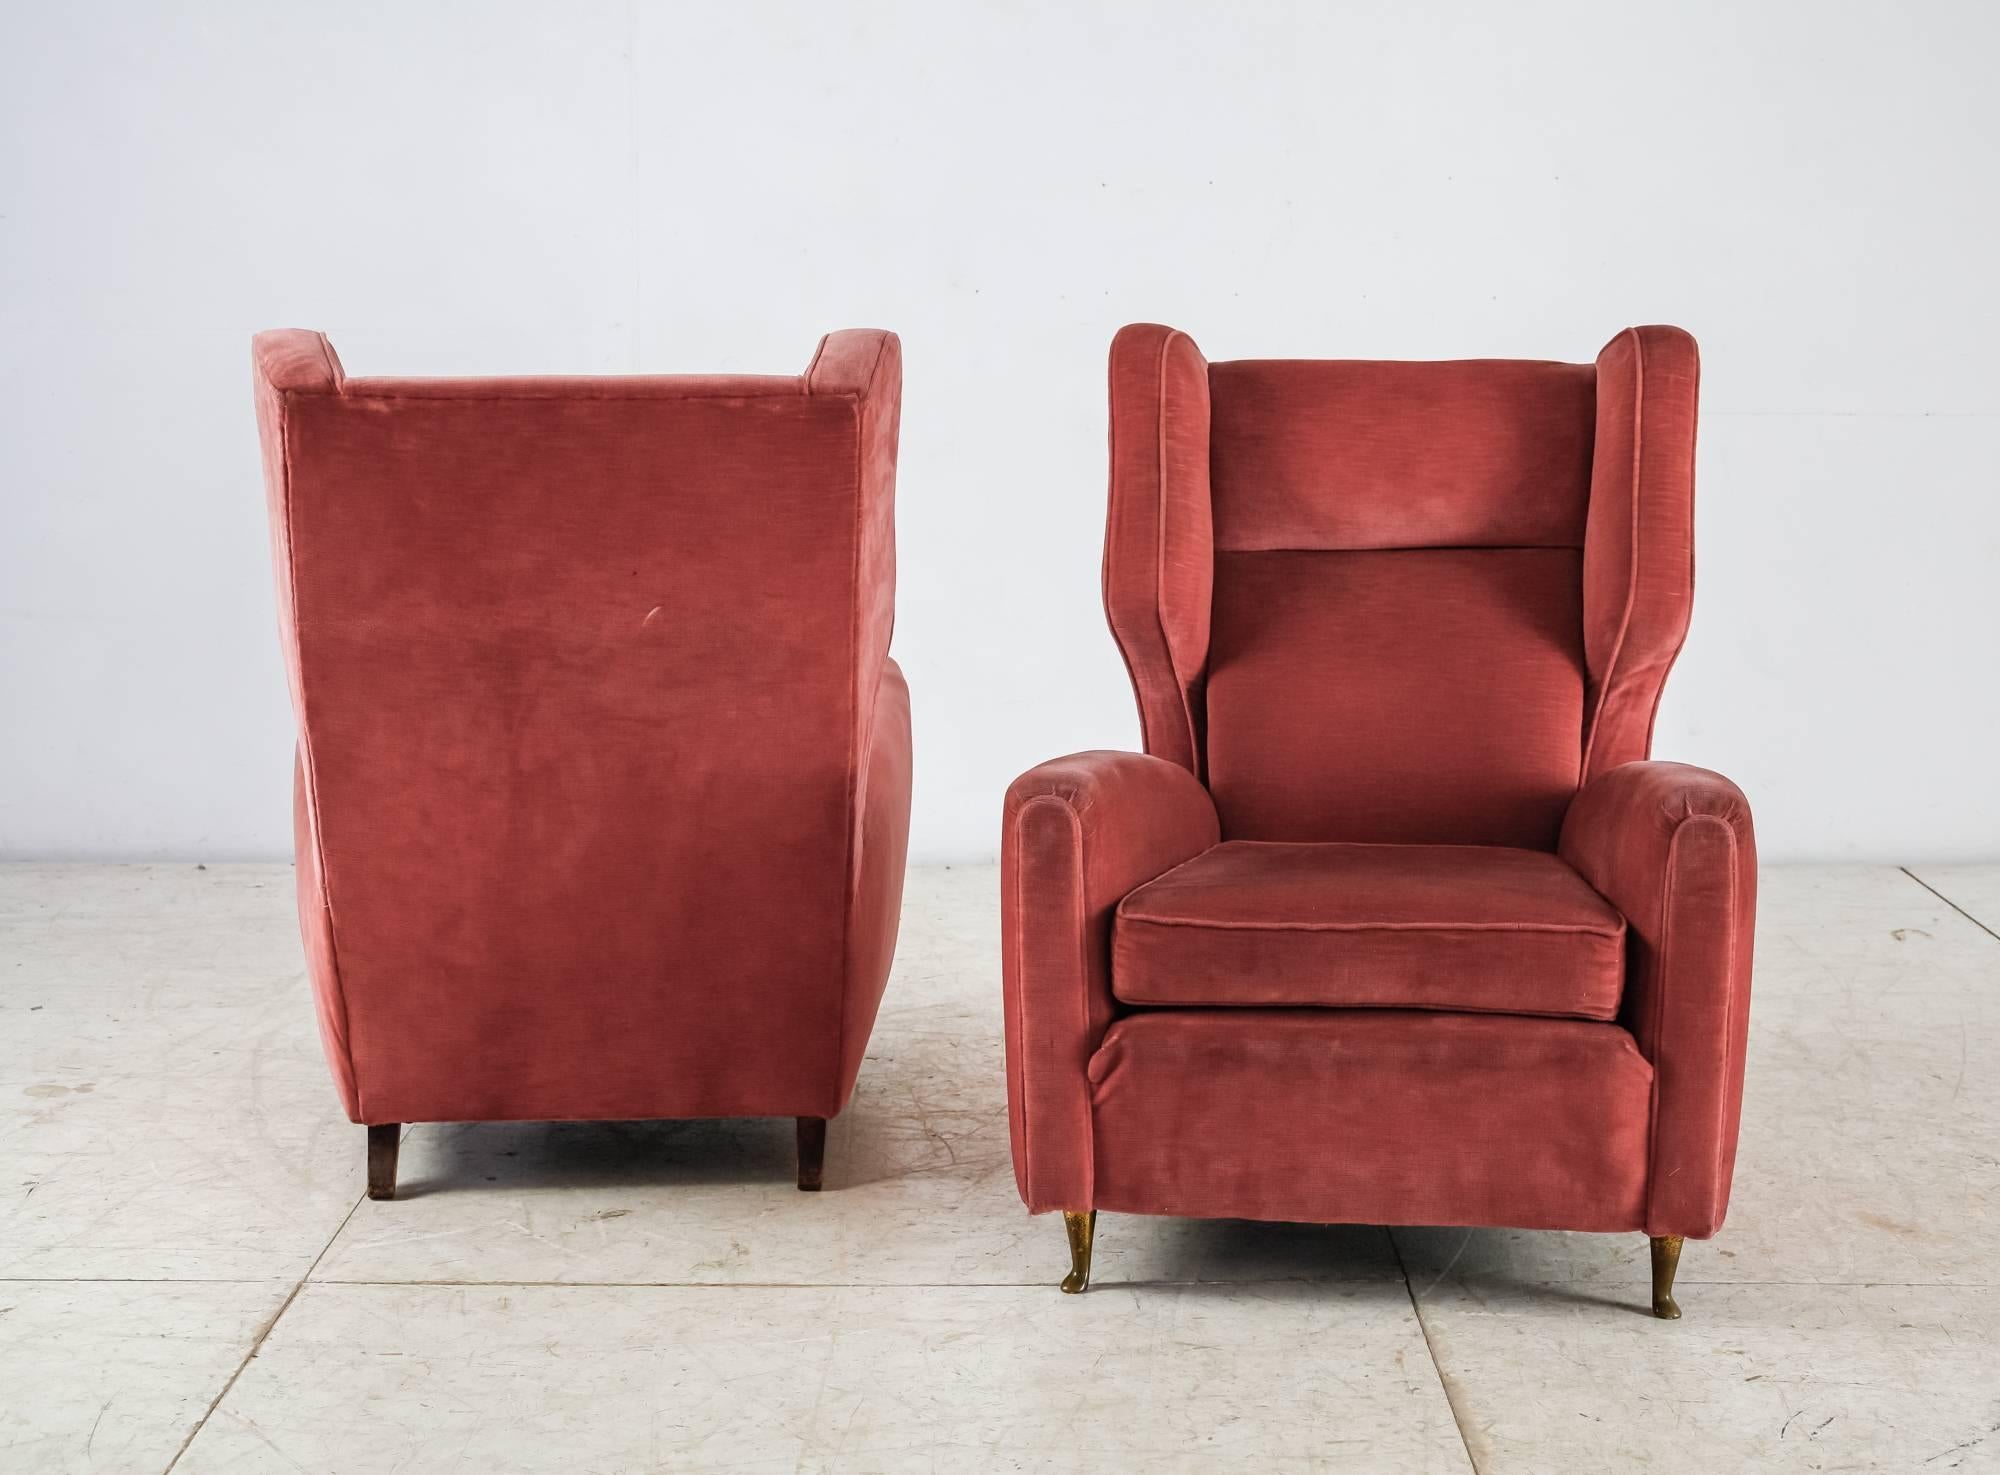 A pair of Paolo Buffa wingback lounge chairs with a coral red velour upholstery and a loose cushion. The chairs stand on curved brass front legs and wooden back legs.
The fabric shows wear due to usage, but the chairs are in an overall good